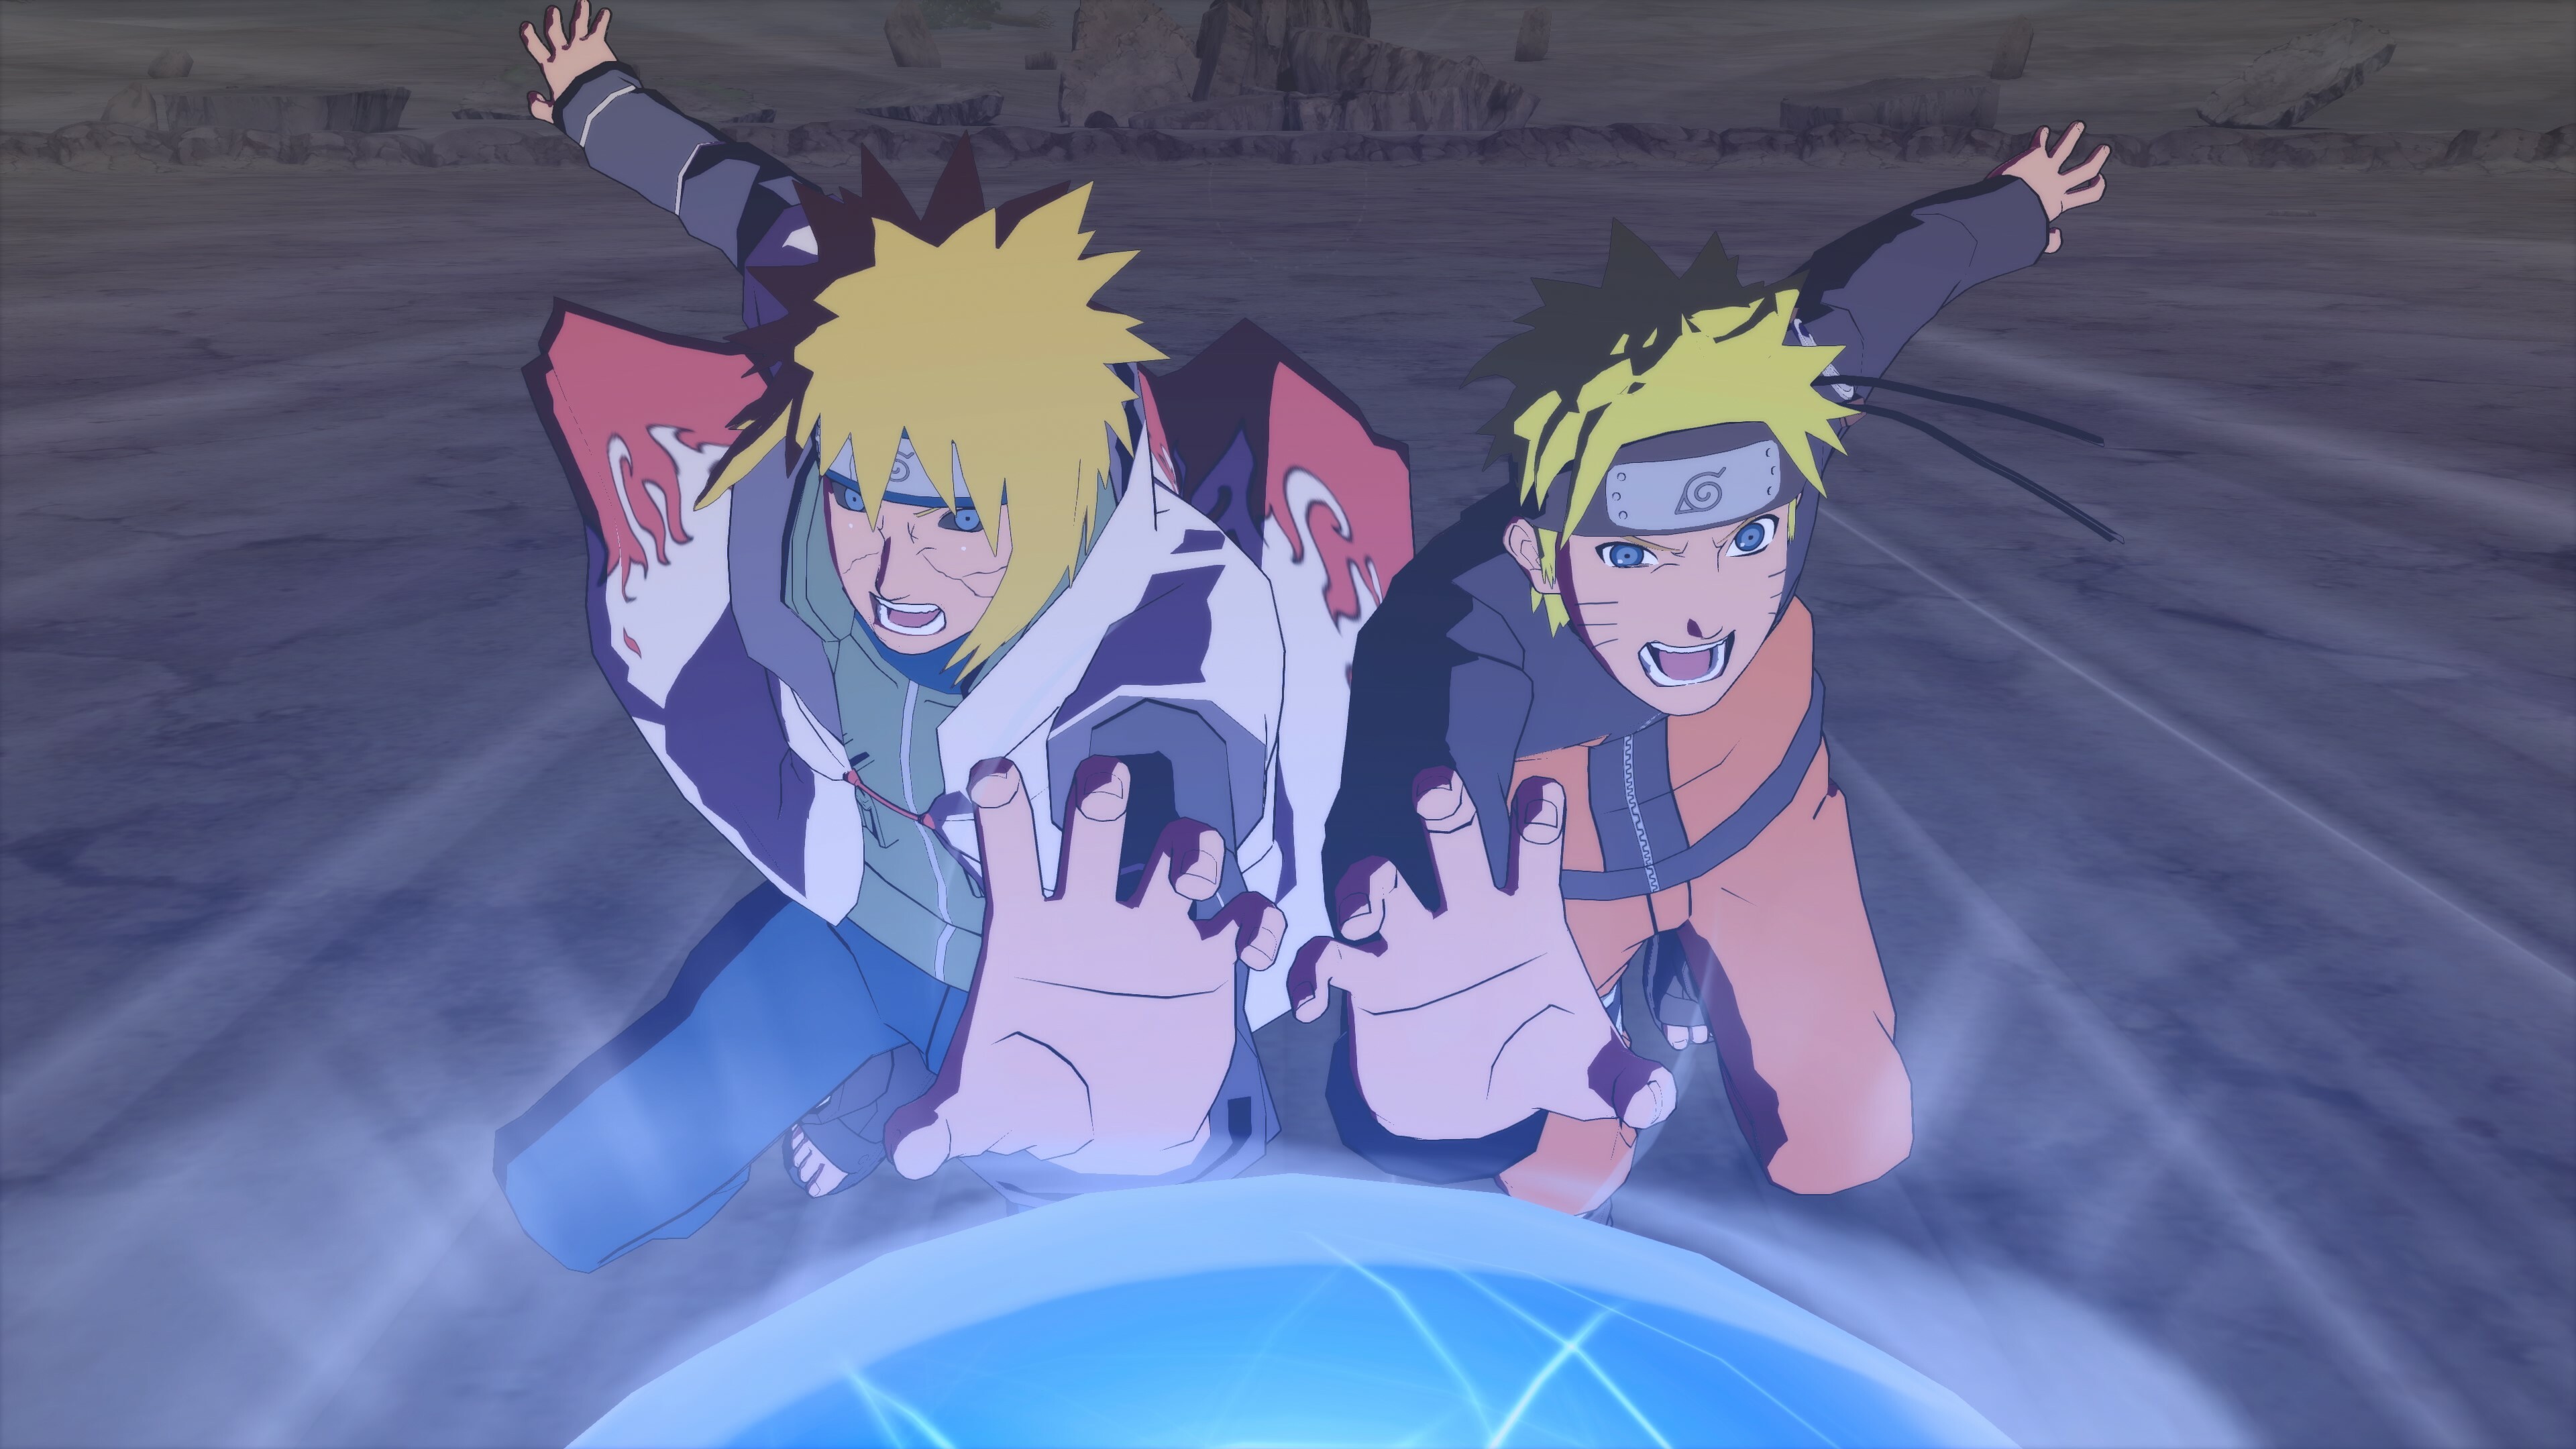 Who is your favorite character of naruto shippuden/boruto beside